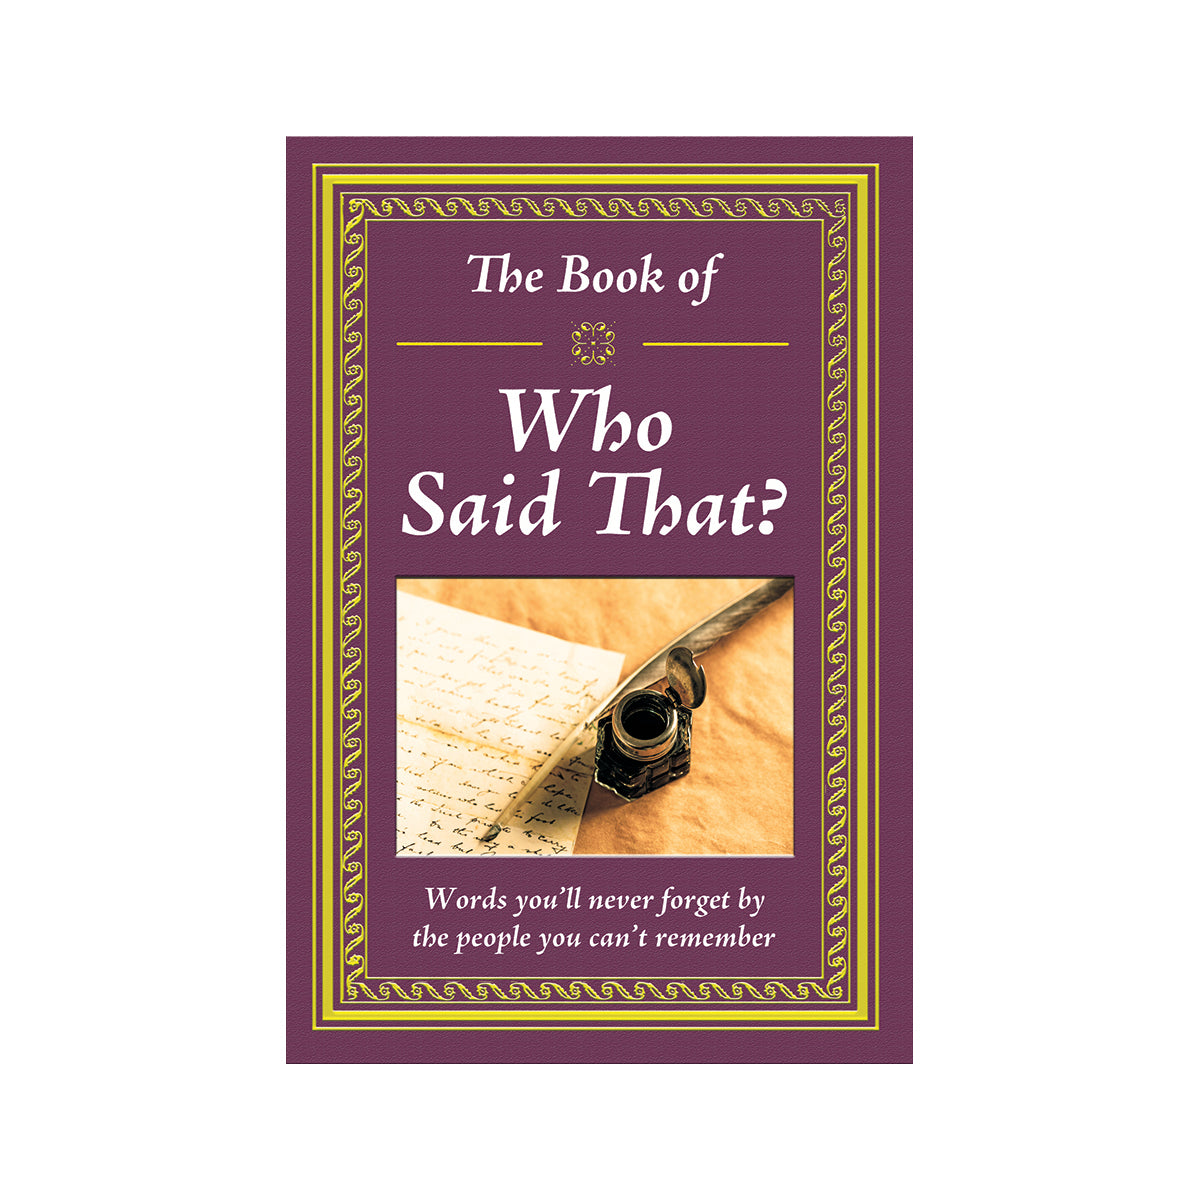 The Book of Who Said That? Fascinating Stories Behind Famous Quotes